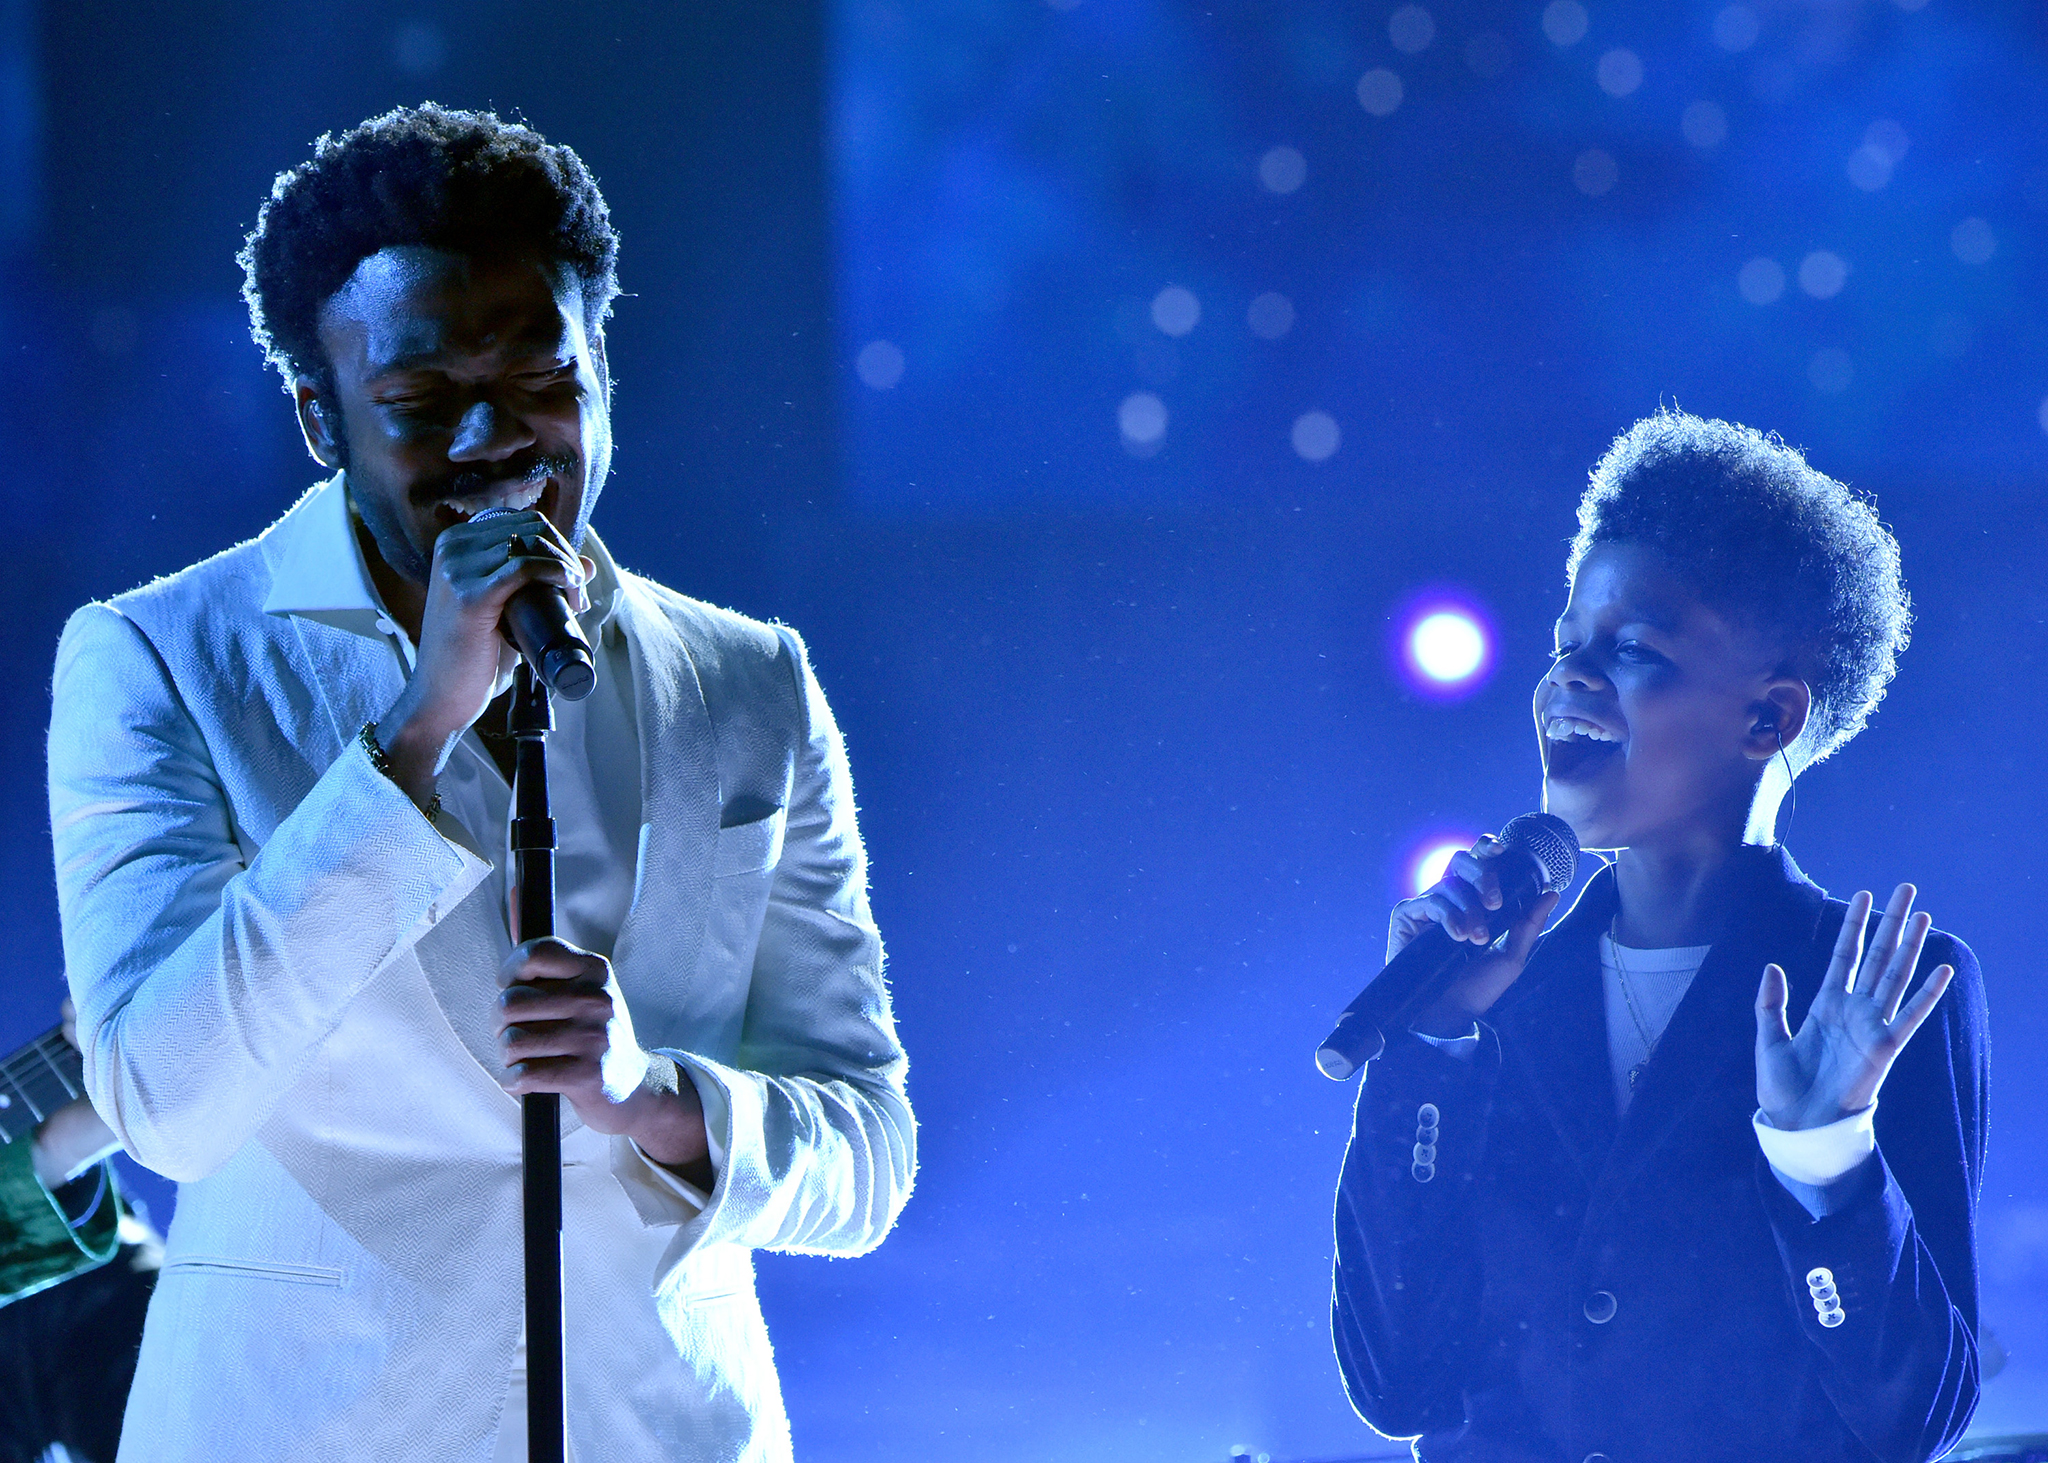 Childish Gambino and JD McCrary perform onstage during the 60th Annual GRAMMY Awards at Madison Square Garden on Jan. 28, 2018 in New York City.